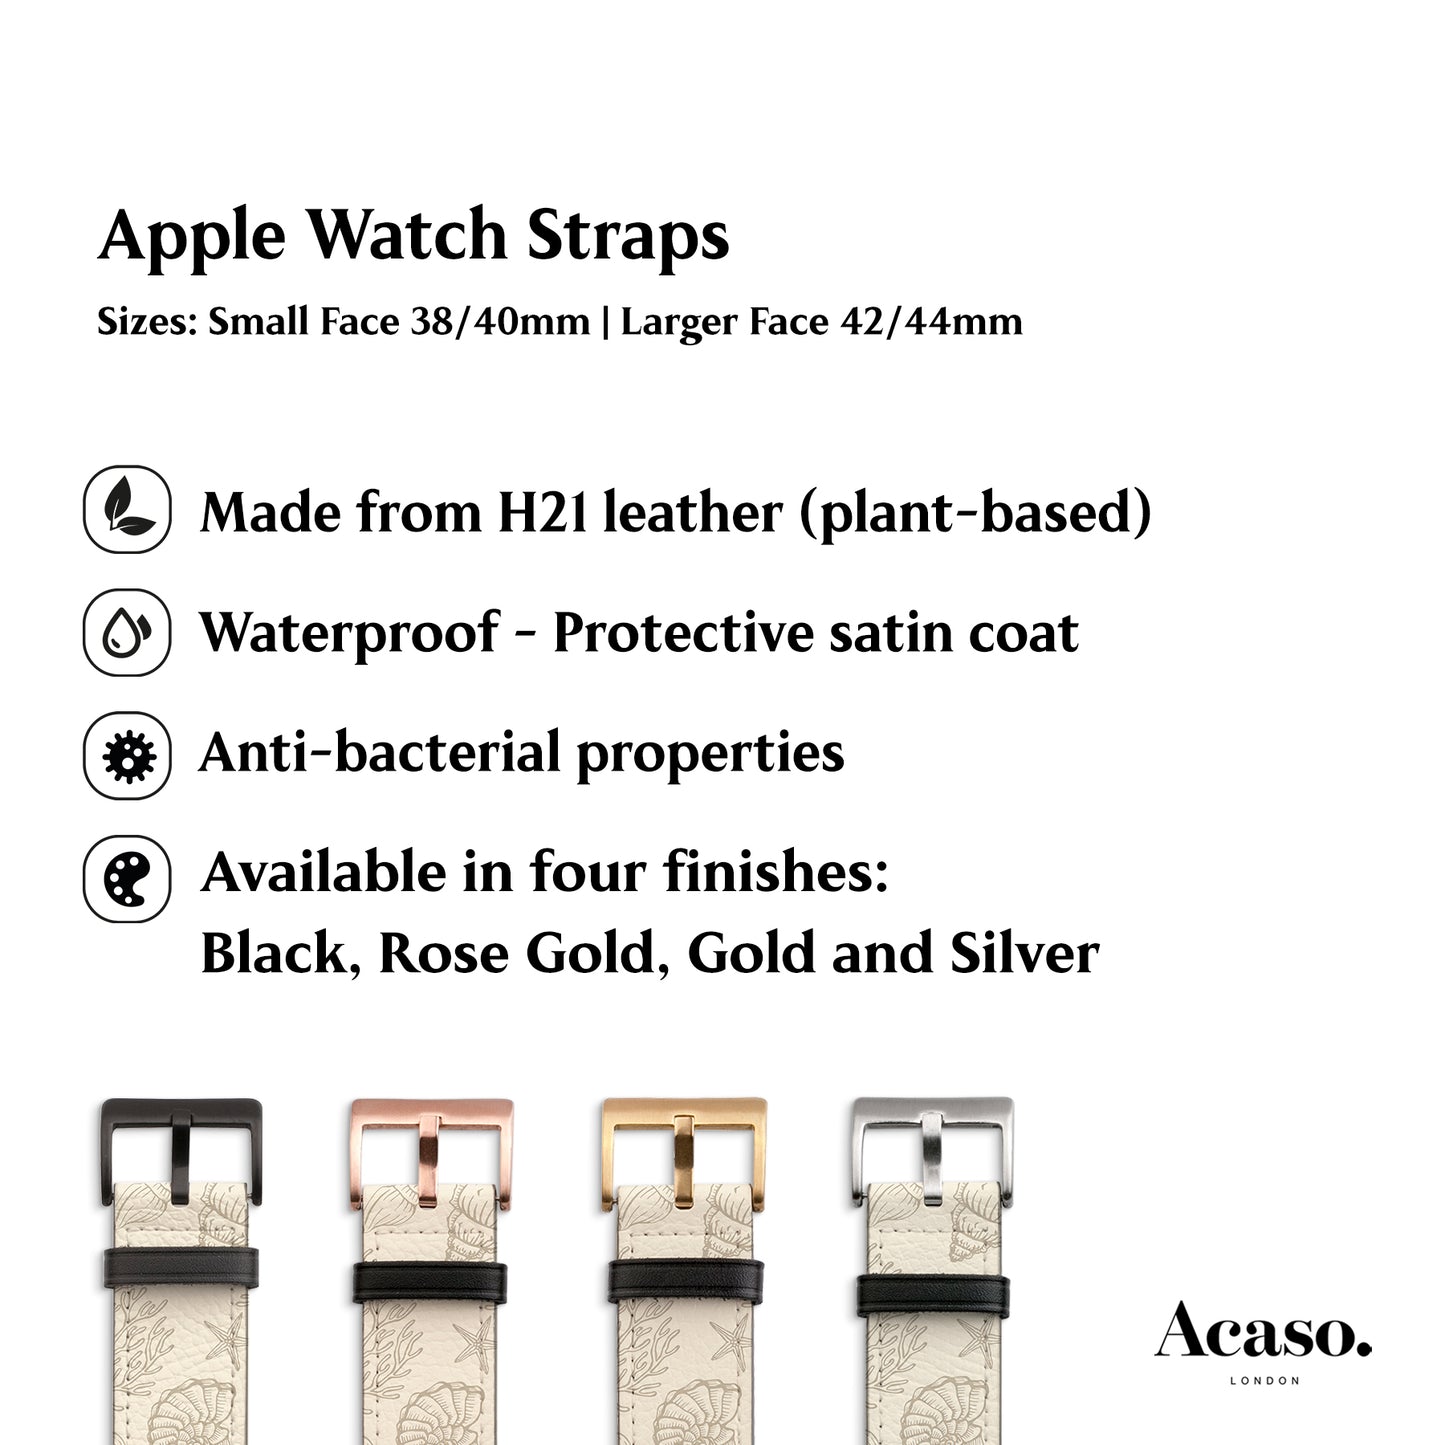 the apple watch strap features different types of buckles